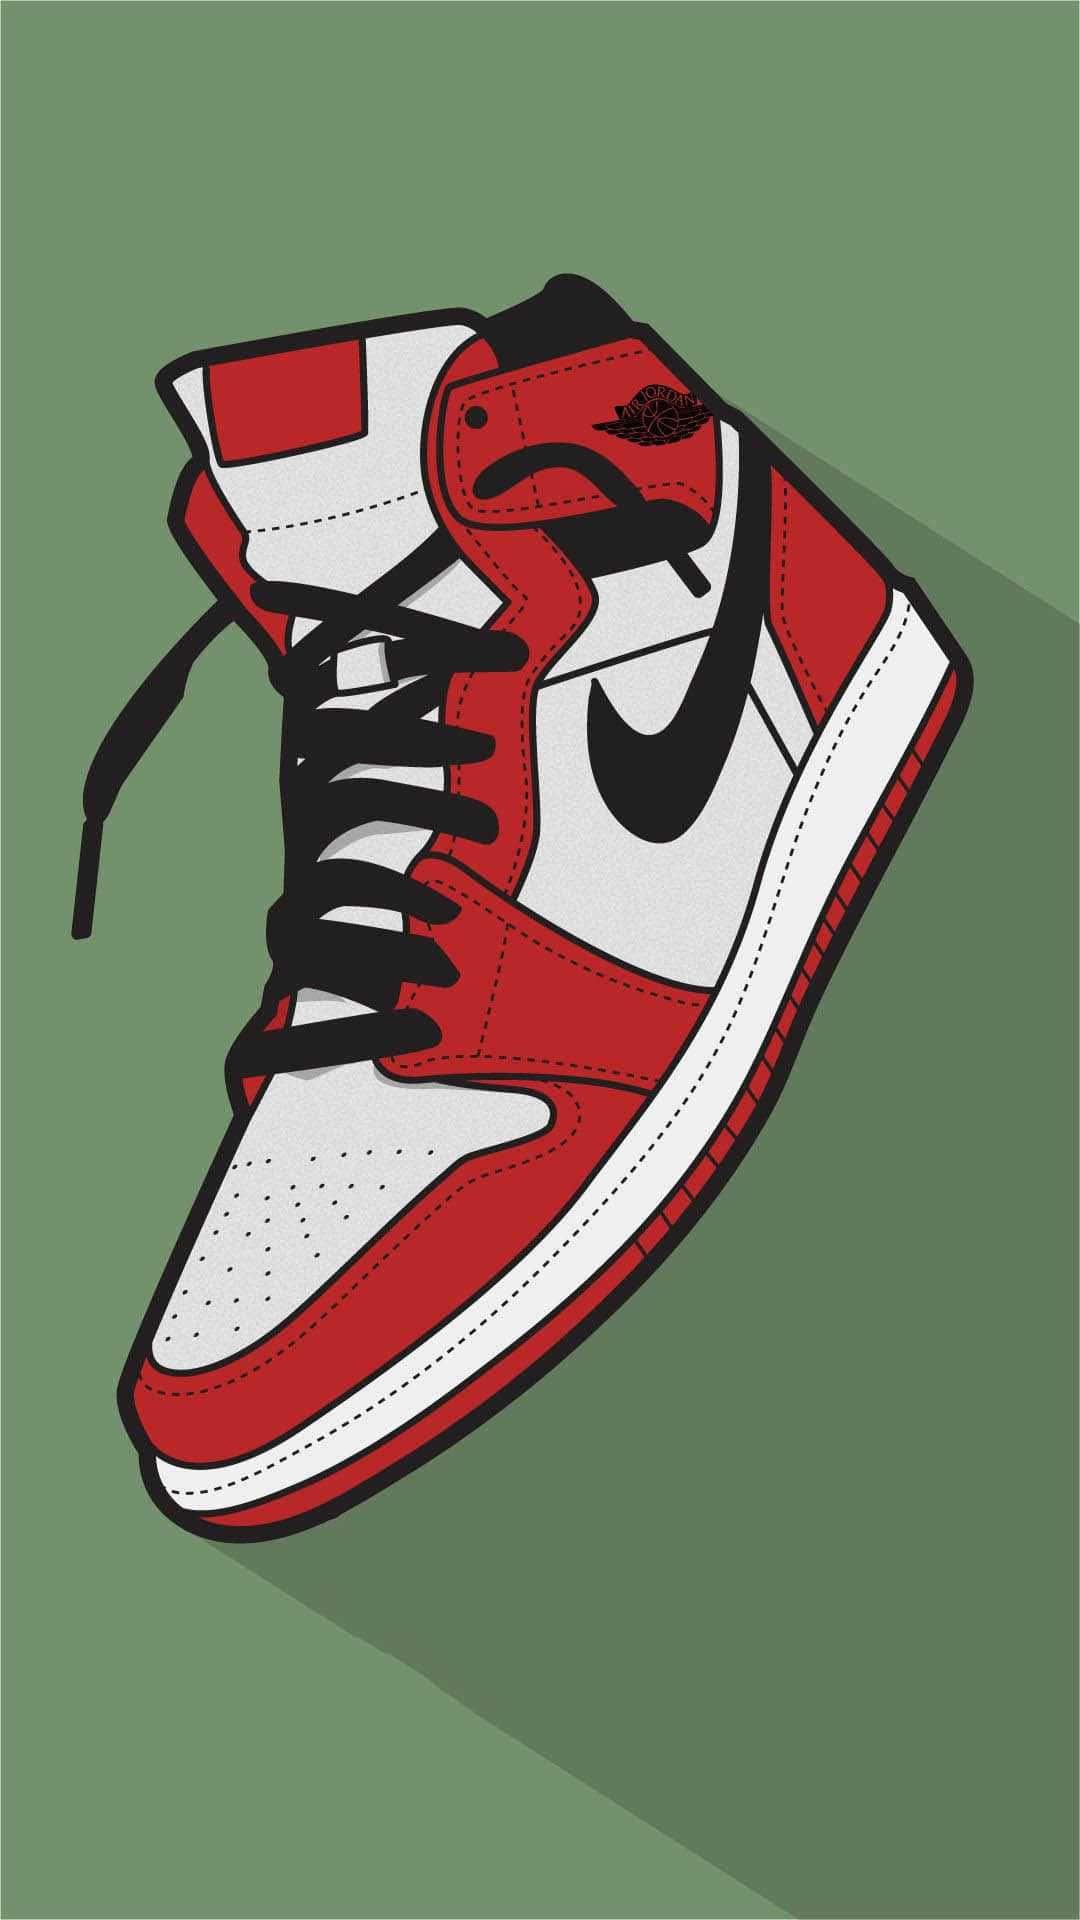 Look Fly with Dope Jordan Shoes Wallpaper